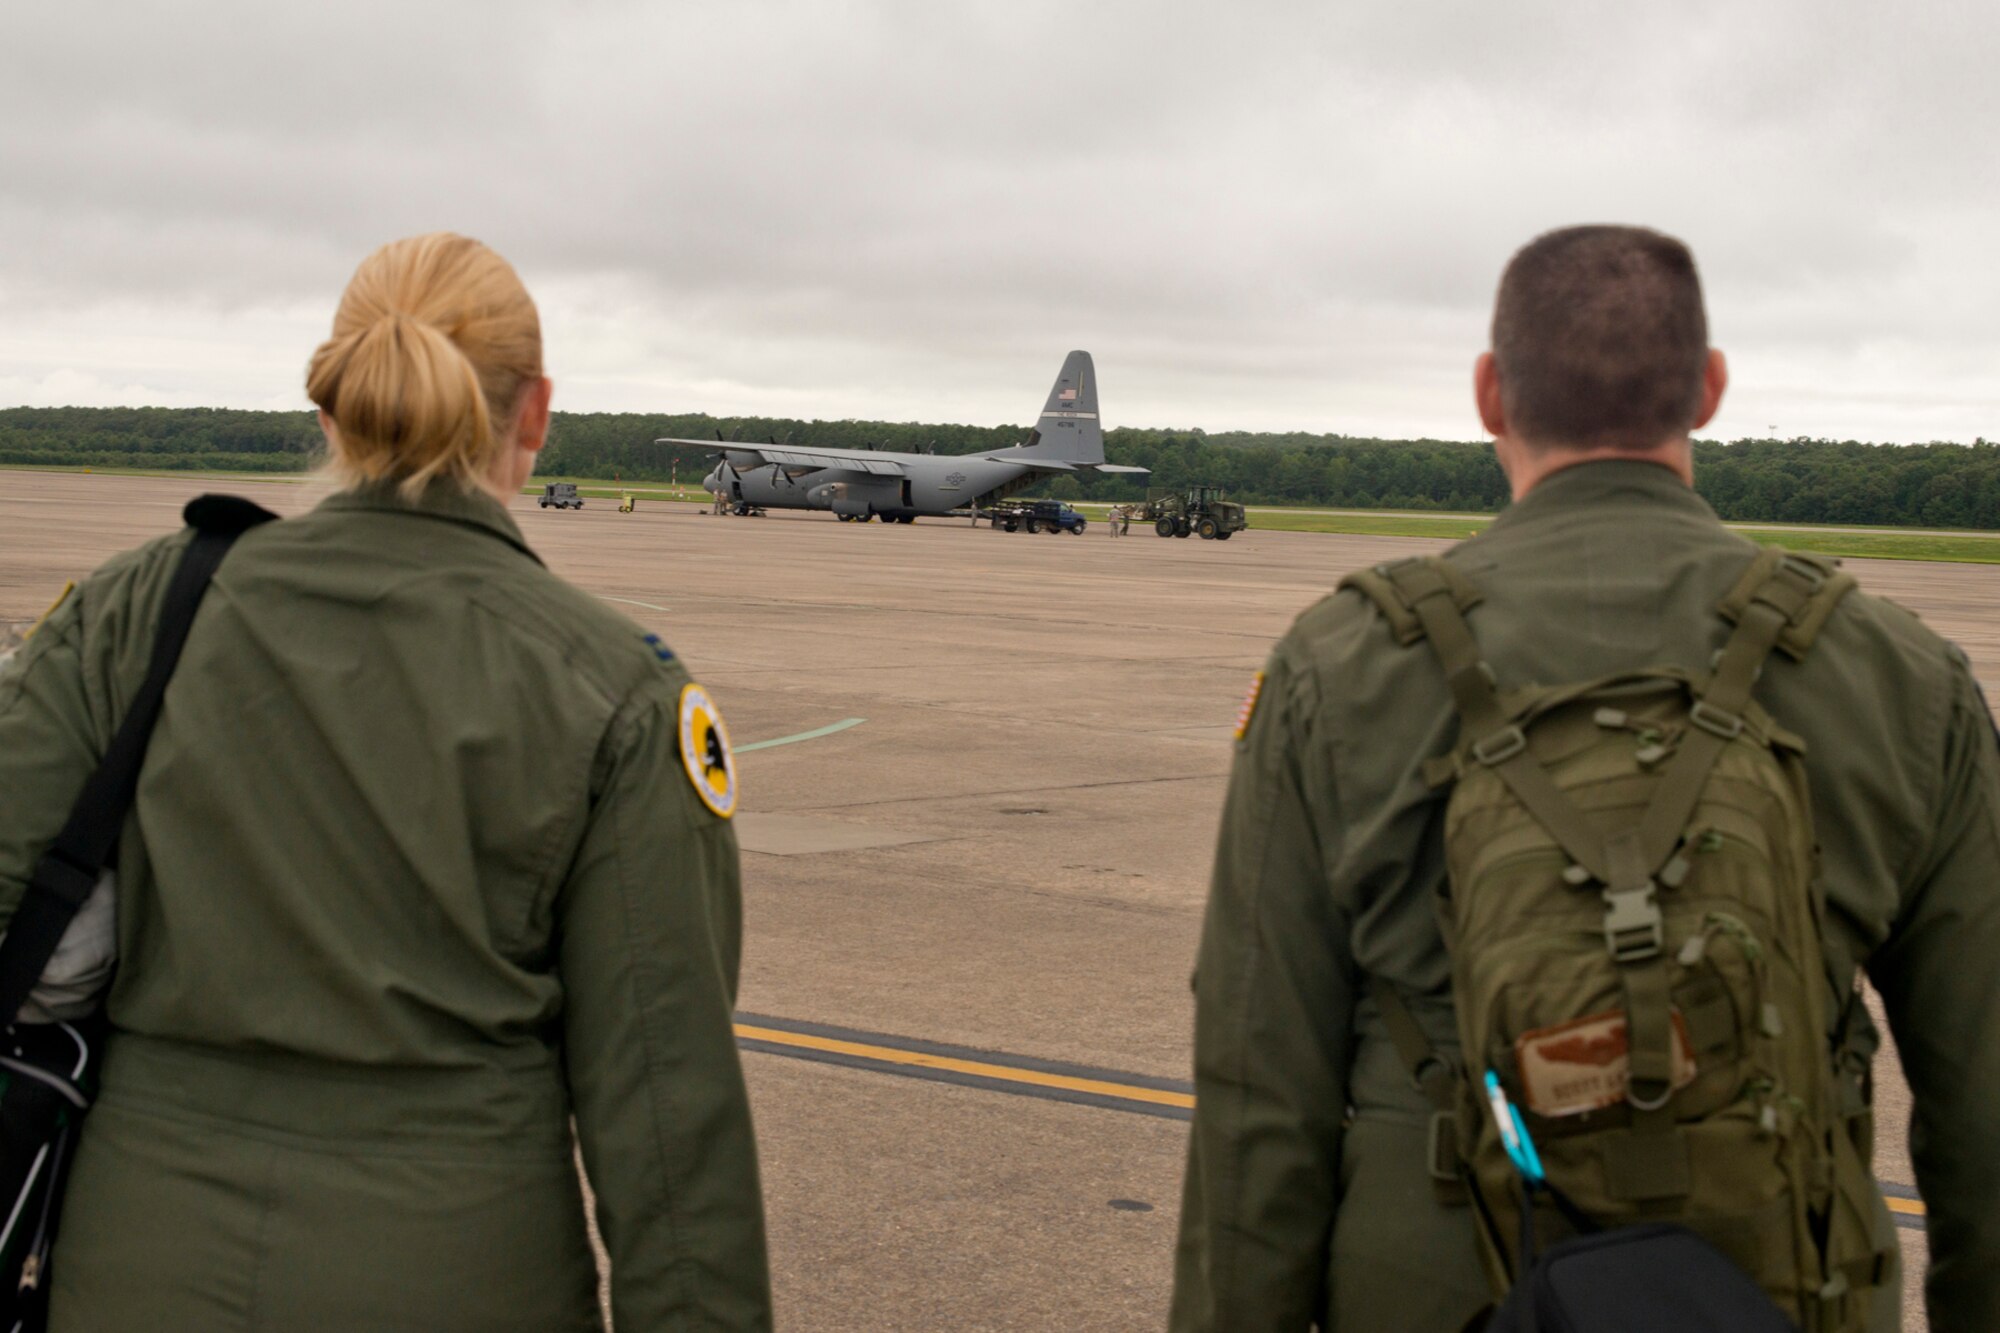 U.S. Air Force Reserve Capt. Kelly Welling and Maj. Scott Lawson, pilots assigned to the 327th Airlift Squadron, walk to an aircraft being loaded on the ramp during the August Unit Assembly Training (UTA) weekend at Little Rock Air Force Base, Ark., Aug. 13, 2016. Both Airmen helped in passing two milestones for the 913th Airlift Group by flying on the first C-130J two-ship mission on a UTA since the 913th Airlift Group’s transition from the “H” to the “J” model. (U.S. Air Force photo by Master Sgt. Jeff Walston) 